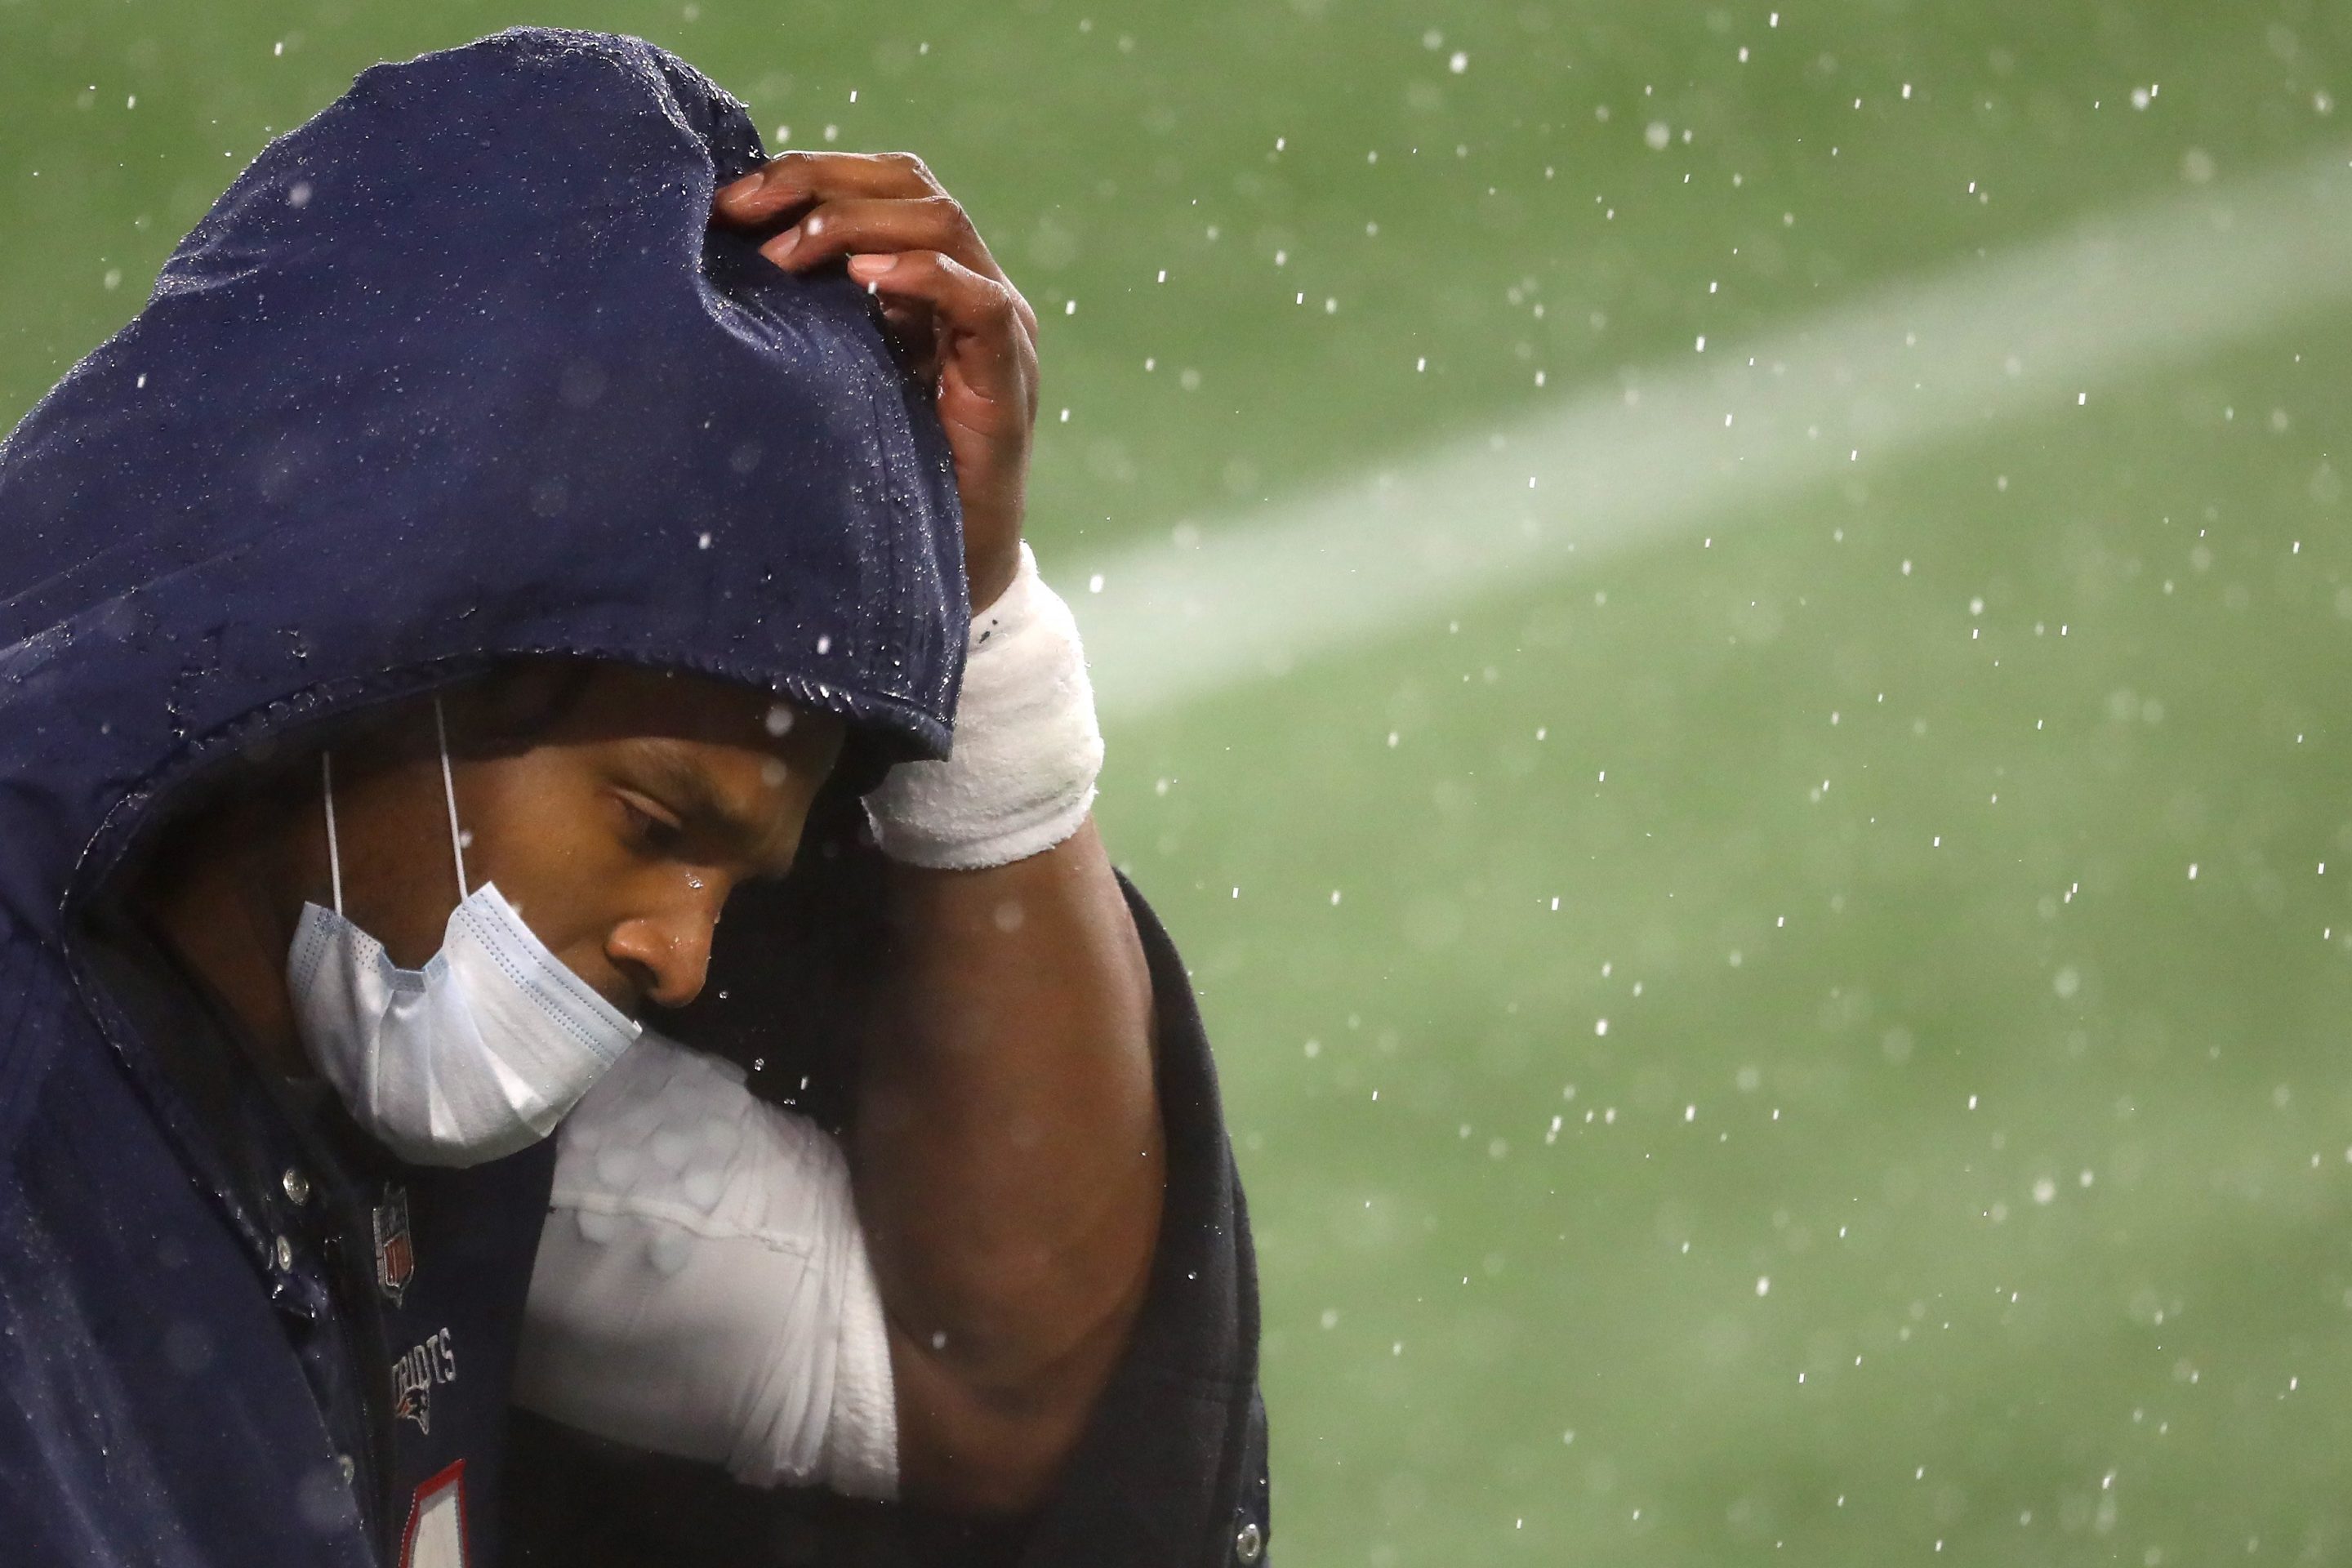 Cam Newton, quarterback, of the New England Patriots, looks on from the sideline wearing a mask and rain jacket during the game against the Baltimore Ravens at Gillette Stadium on November 15, 2020 in Foxborough, Massachusetts.